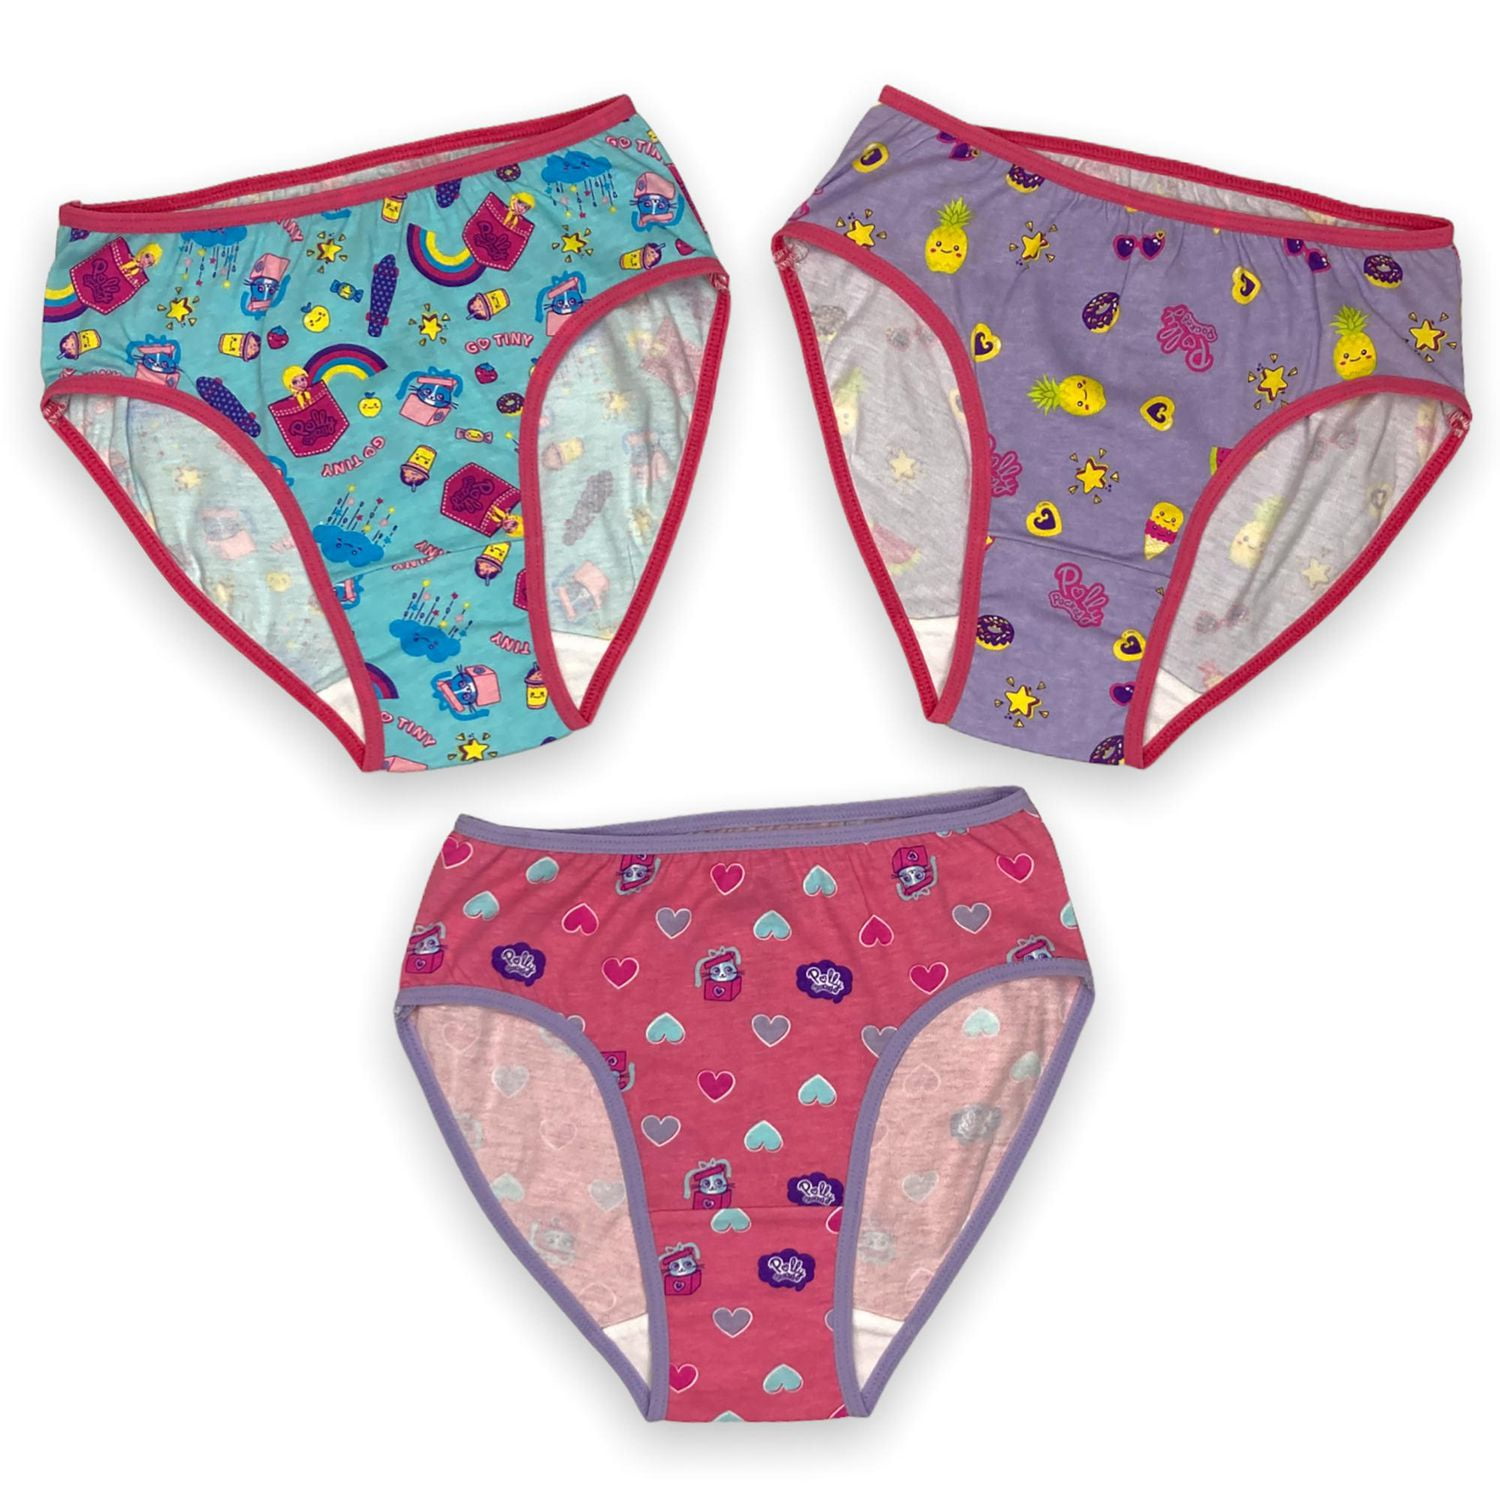 https://www.walmart.ca/en/ip/polly-pocket-girls-underwear-these-girls-classic-panties-come-in-a-pack-of-6-and-have-a-thin-elastic-band-at-the-waist-and-around-the-leg-and-blue/6000205853981